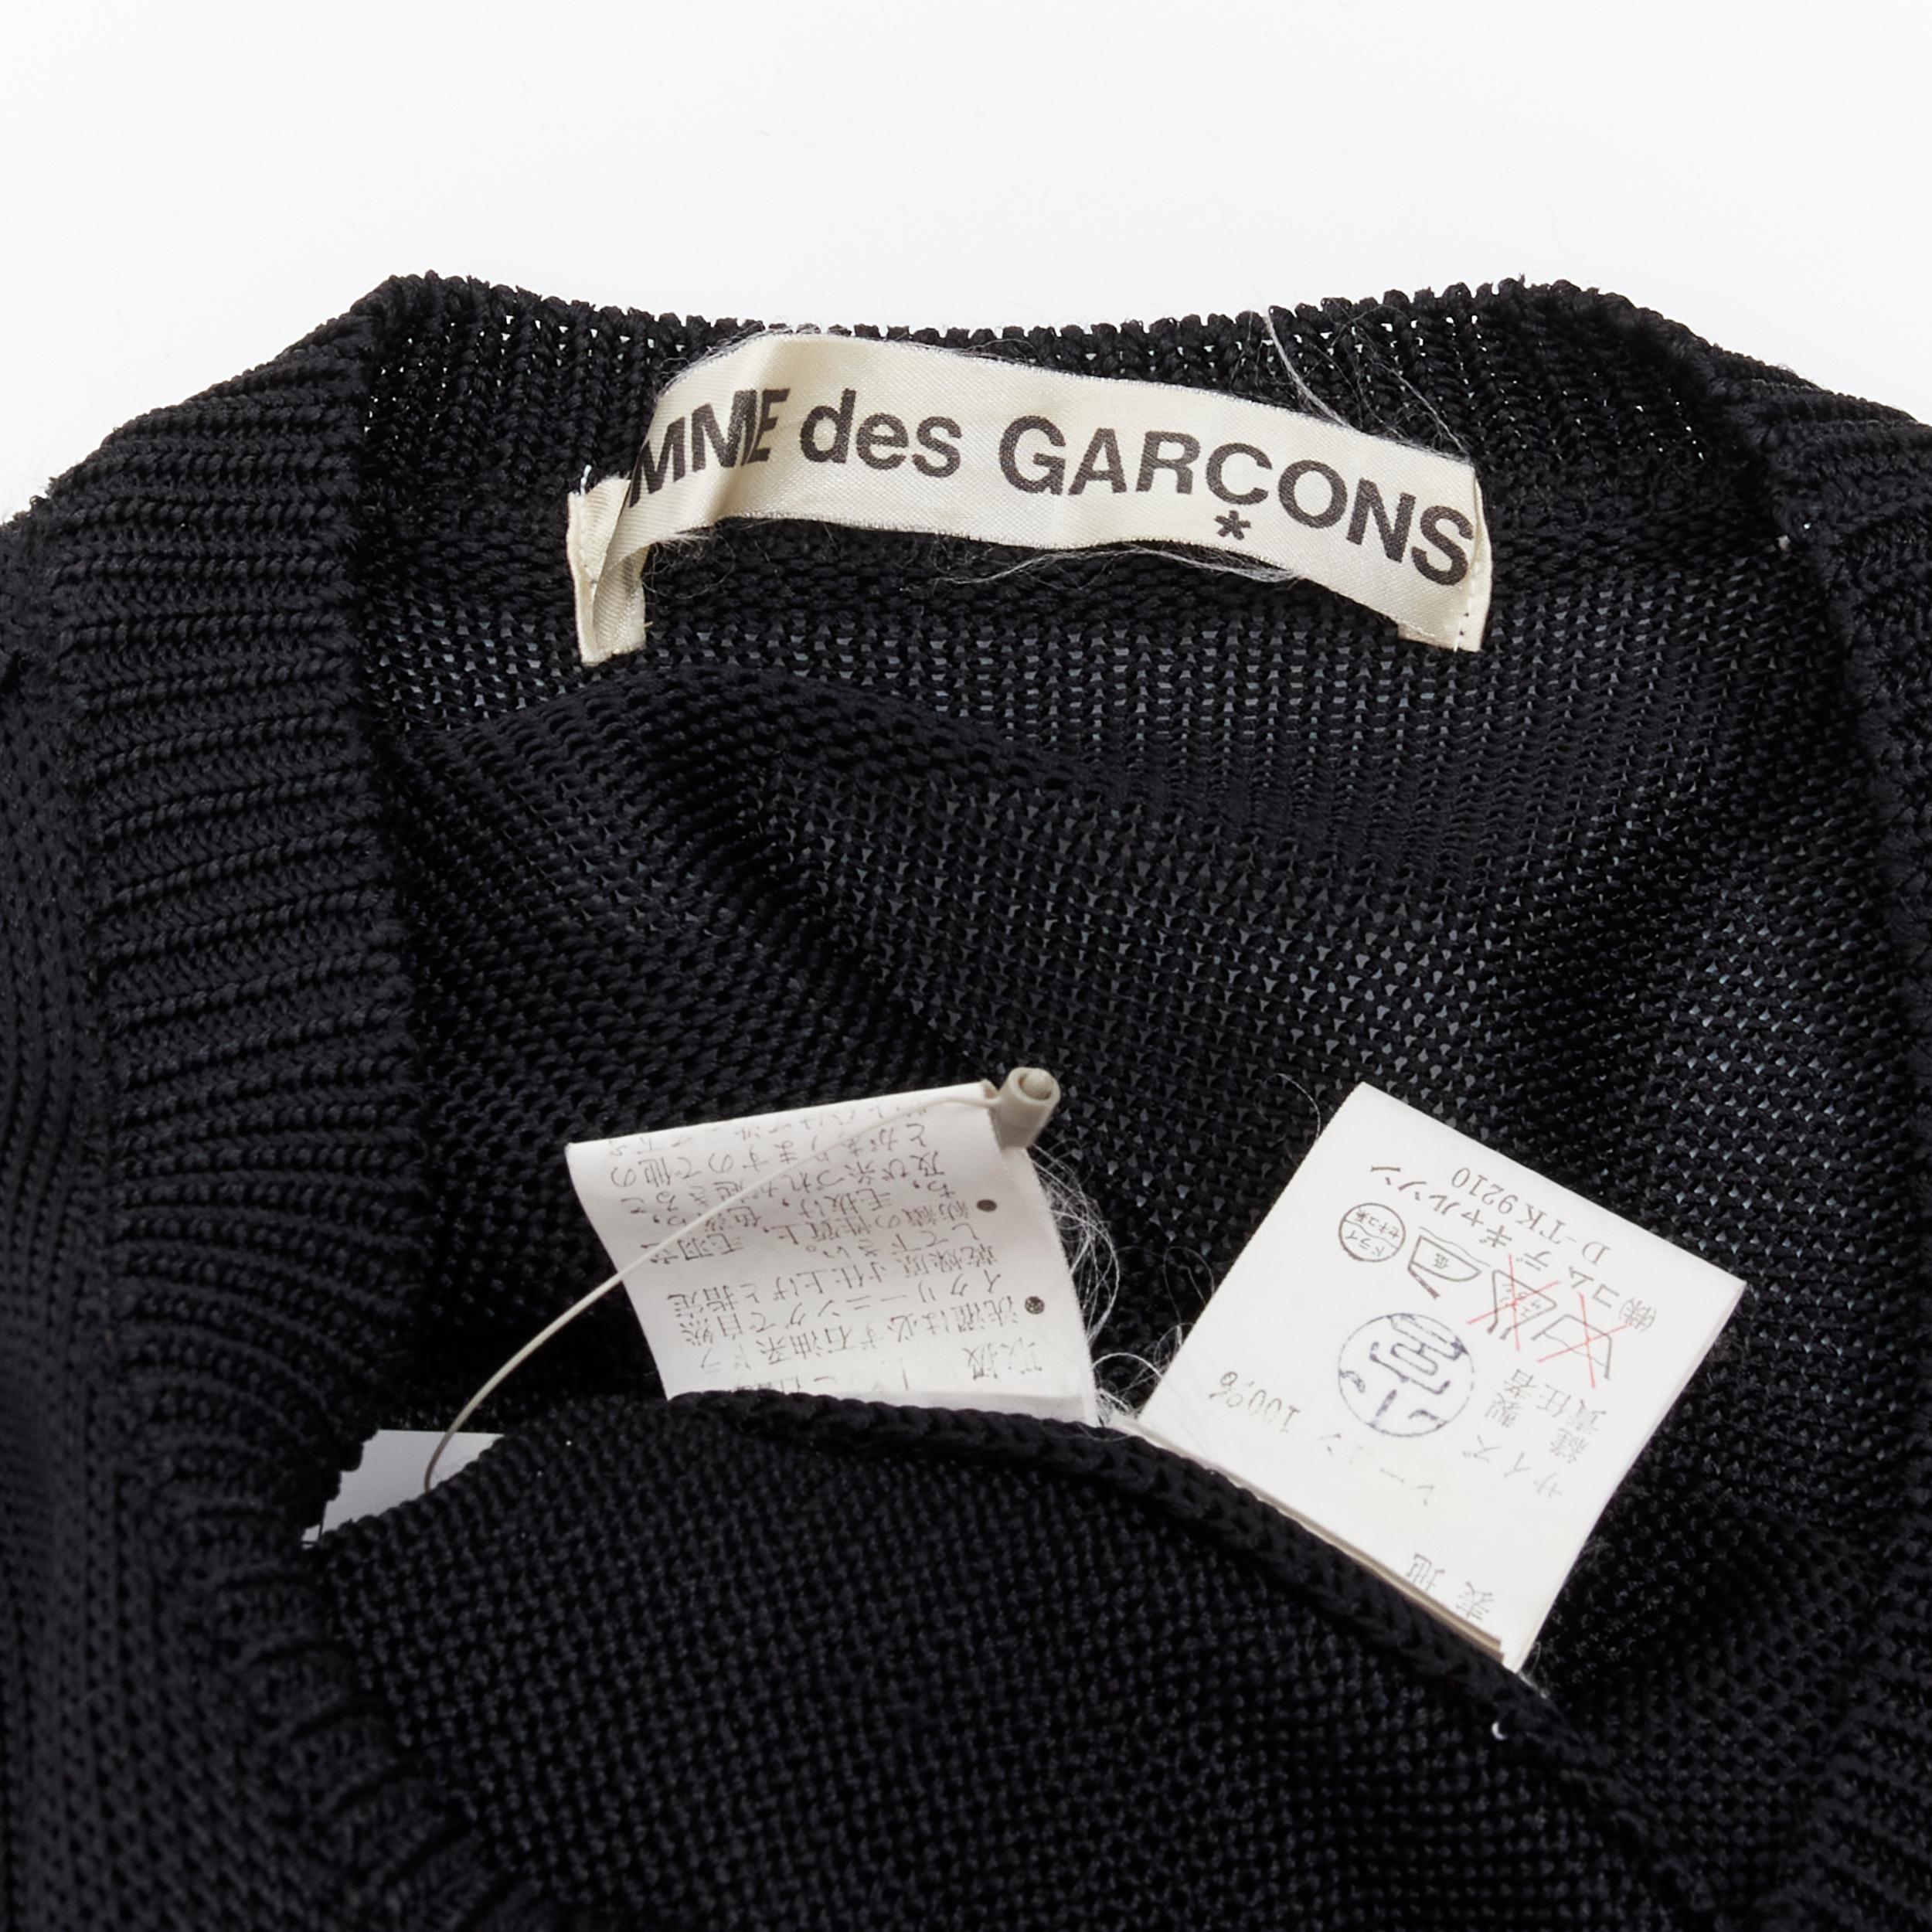 COMME DES GARCONS Vintage 1980s black knitted extra long sleeves sweater dress For Sale 4